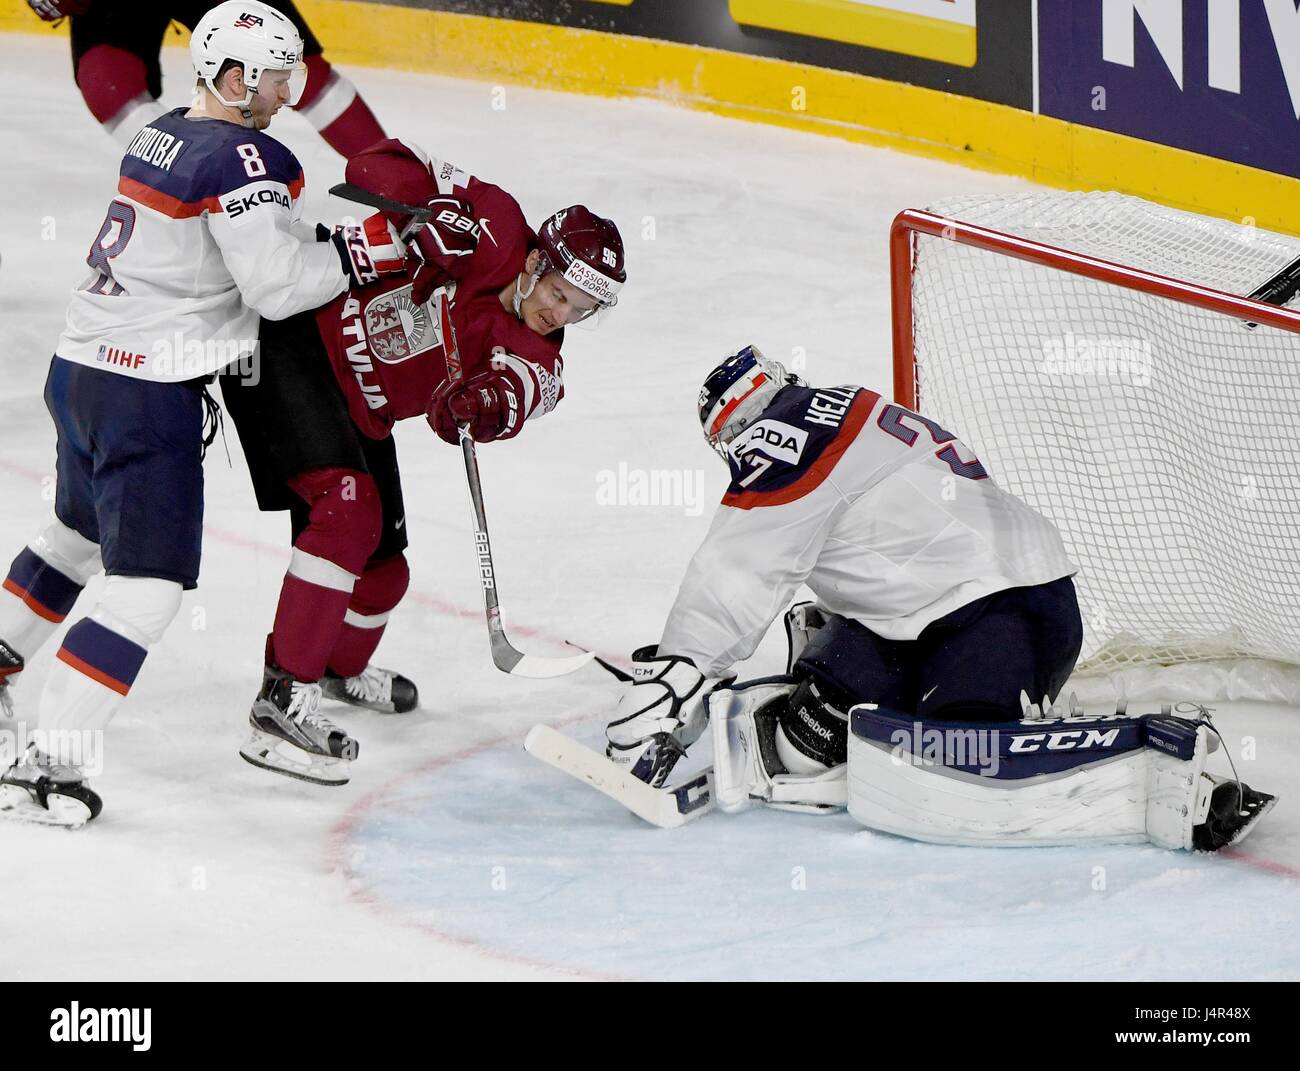 Cologne, Germany. 12th May, 2017. Latvia's Maris Bicevskis (M) tries to  score against US goalkeeper Connor Hellebuyck (R) during the Ice Hockey  World Championship group match between Latvia and USA at the